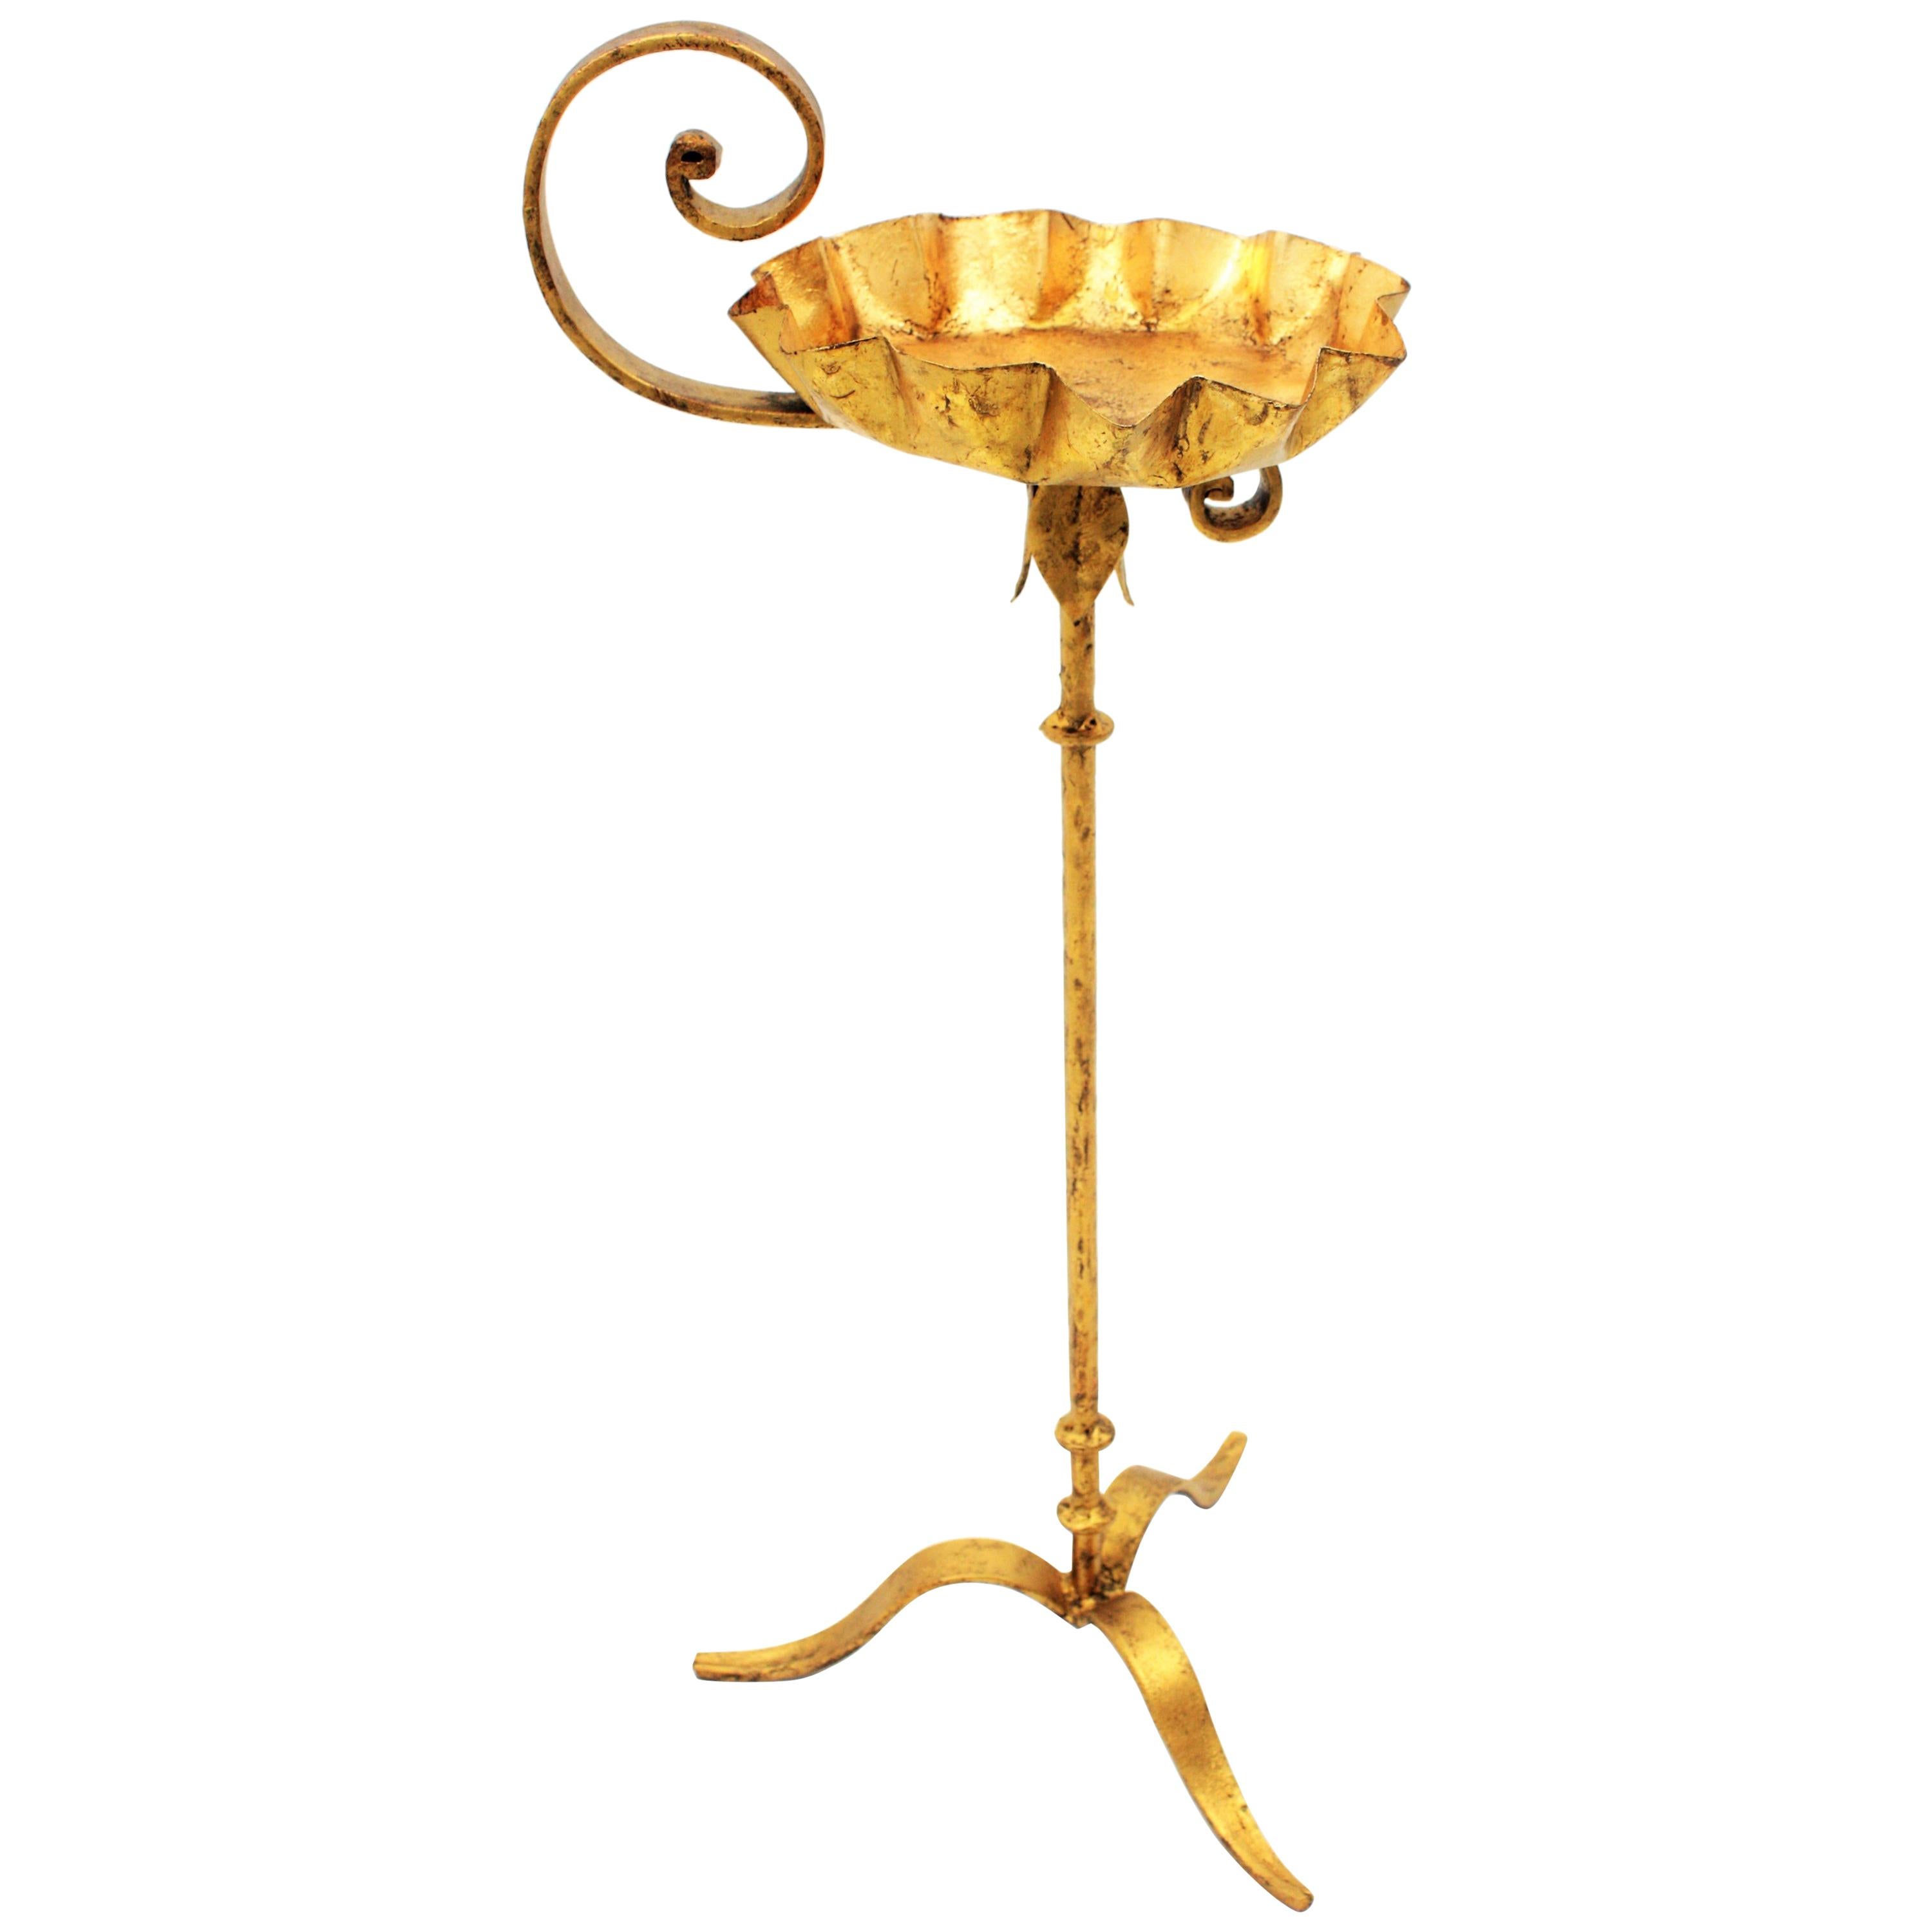 20th Century Spanish Gilt Iron Floor Ashtray / Candle Stand / End Drink Table